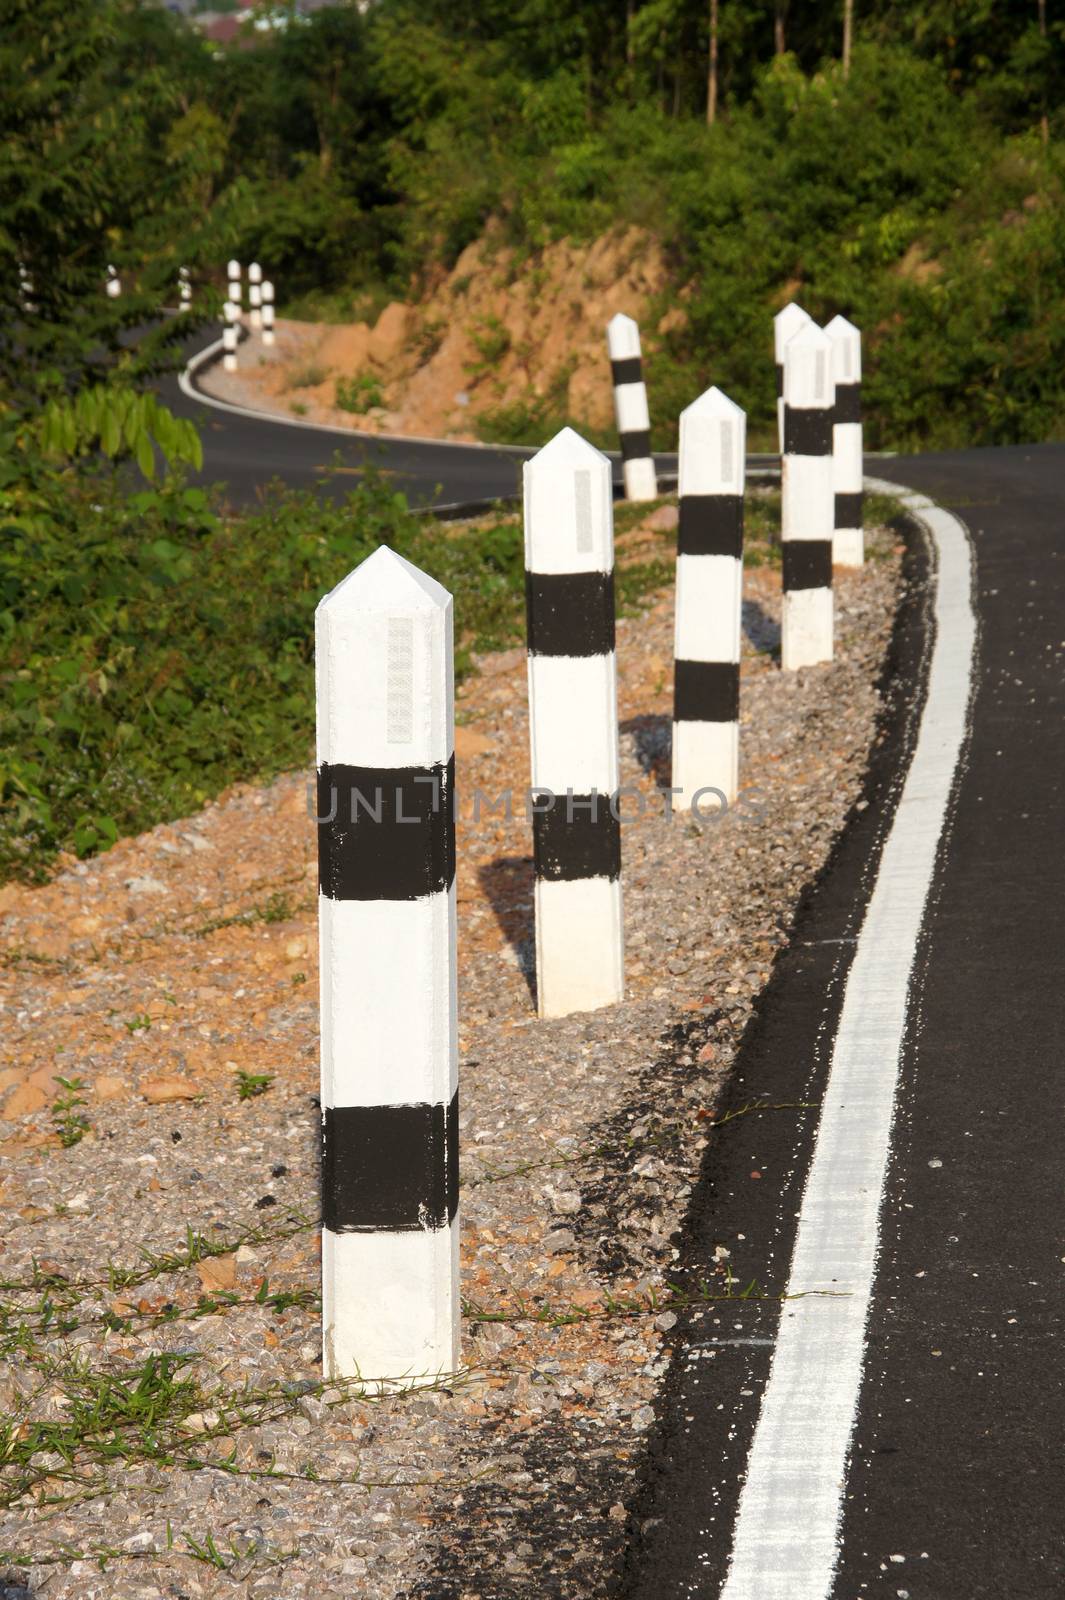 Stone pillars prevent accidents on the road curved.